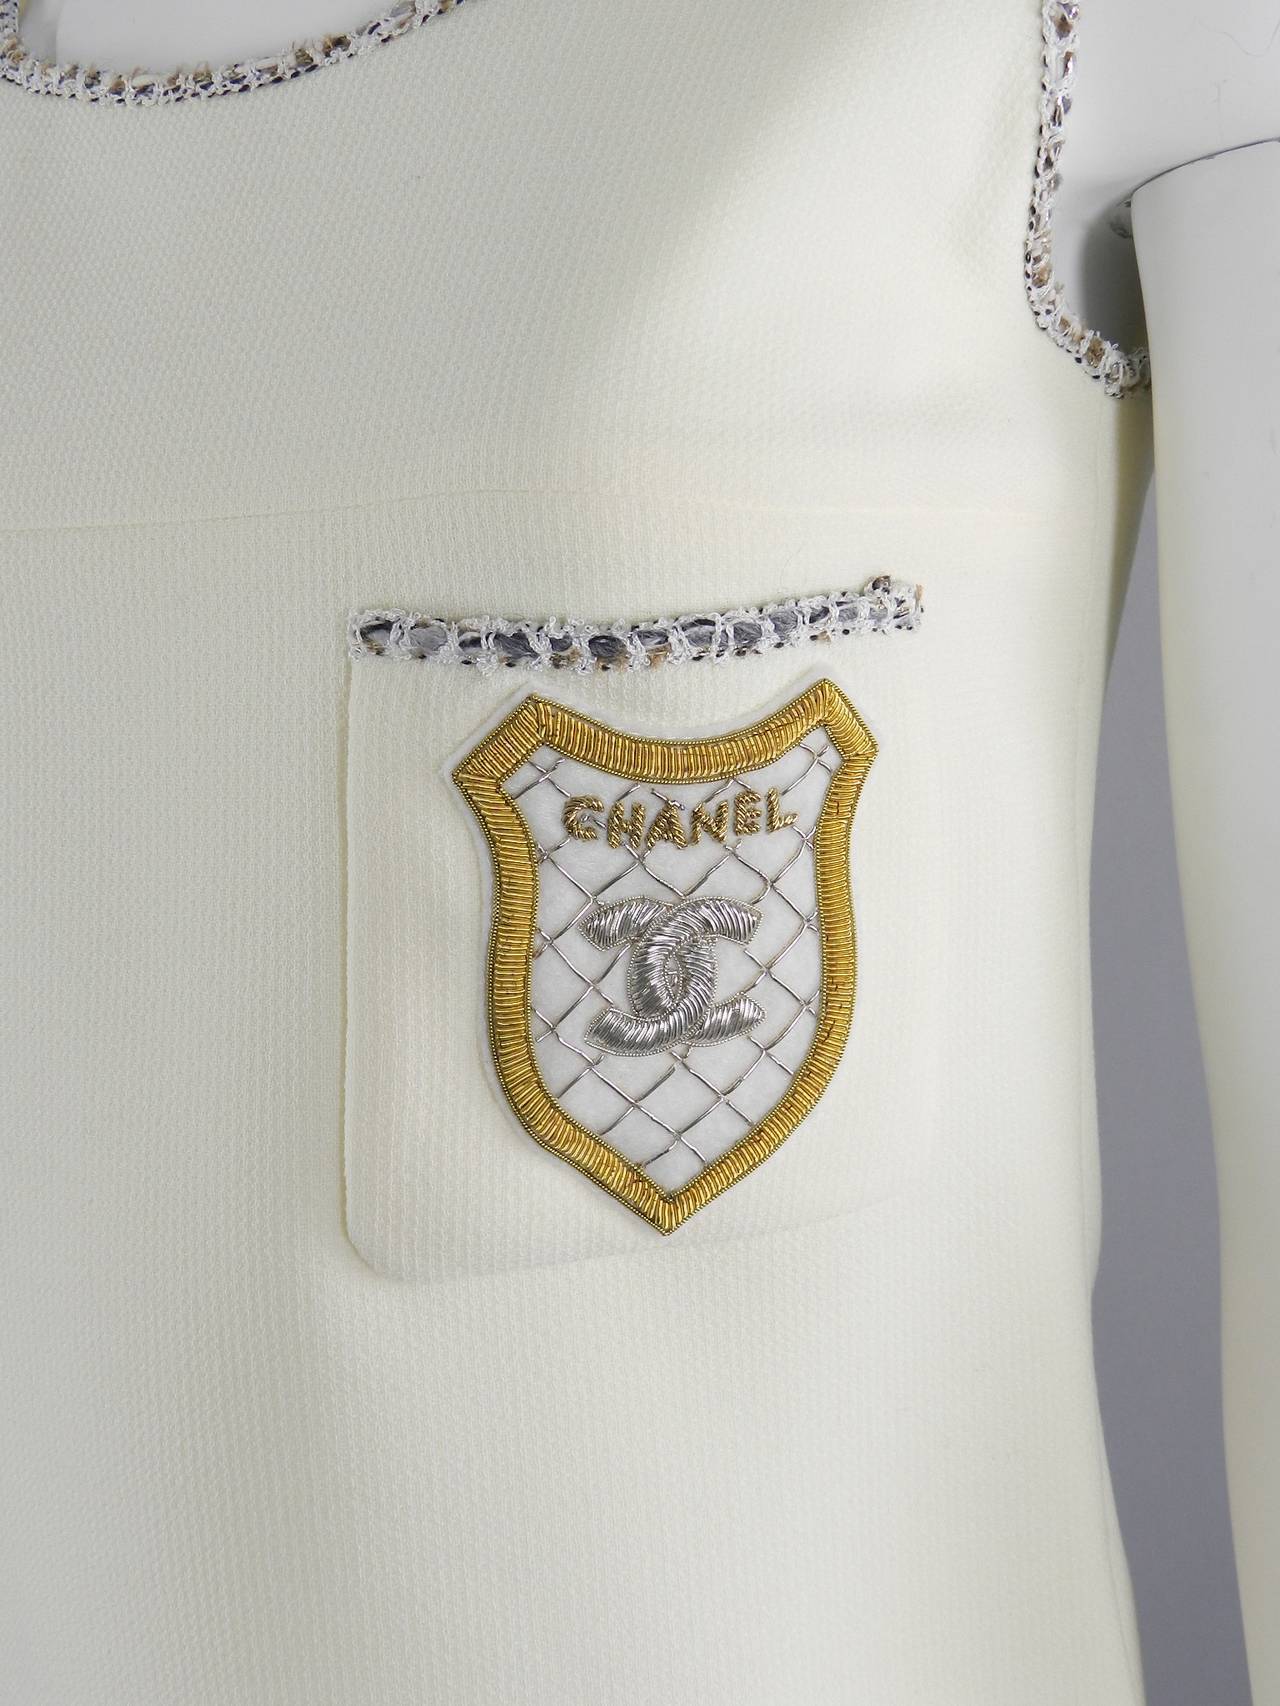 Chanel 2005 Cruise collection white tank top with CC crest design. Has a hidden side zipper and goes on over the head and shoulders. Excellent condition. Tagged size FR 38 - USA 6. To fit 34